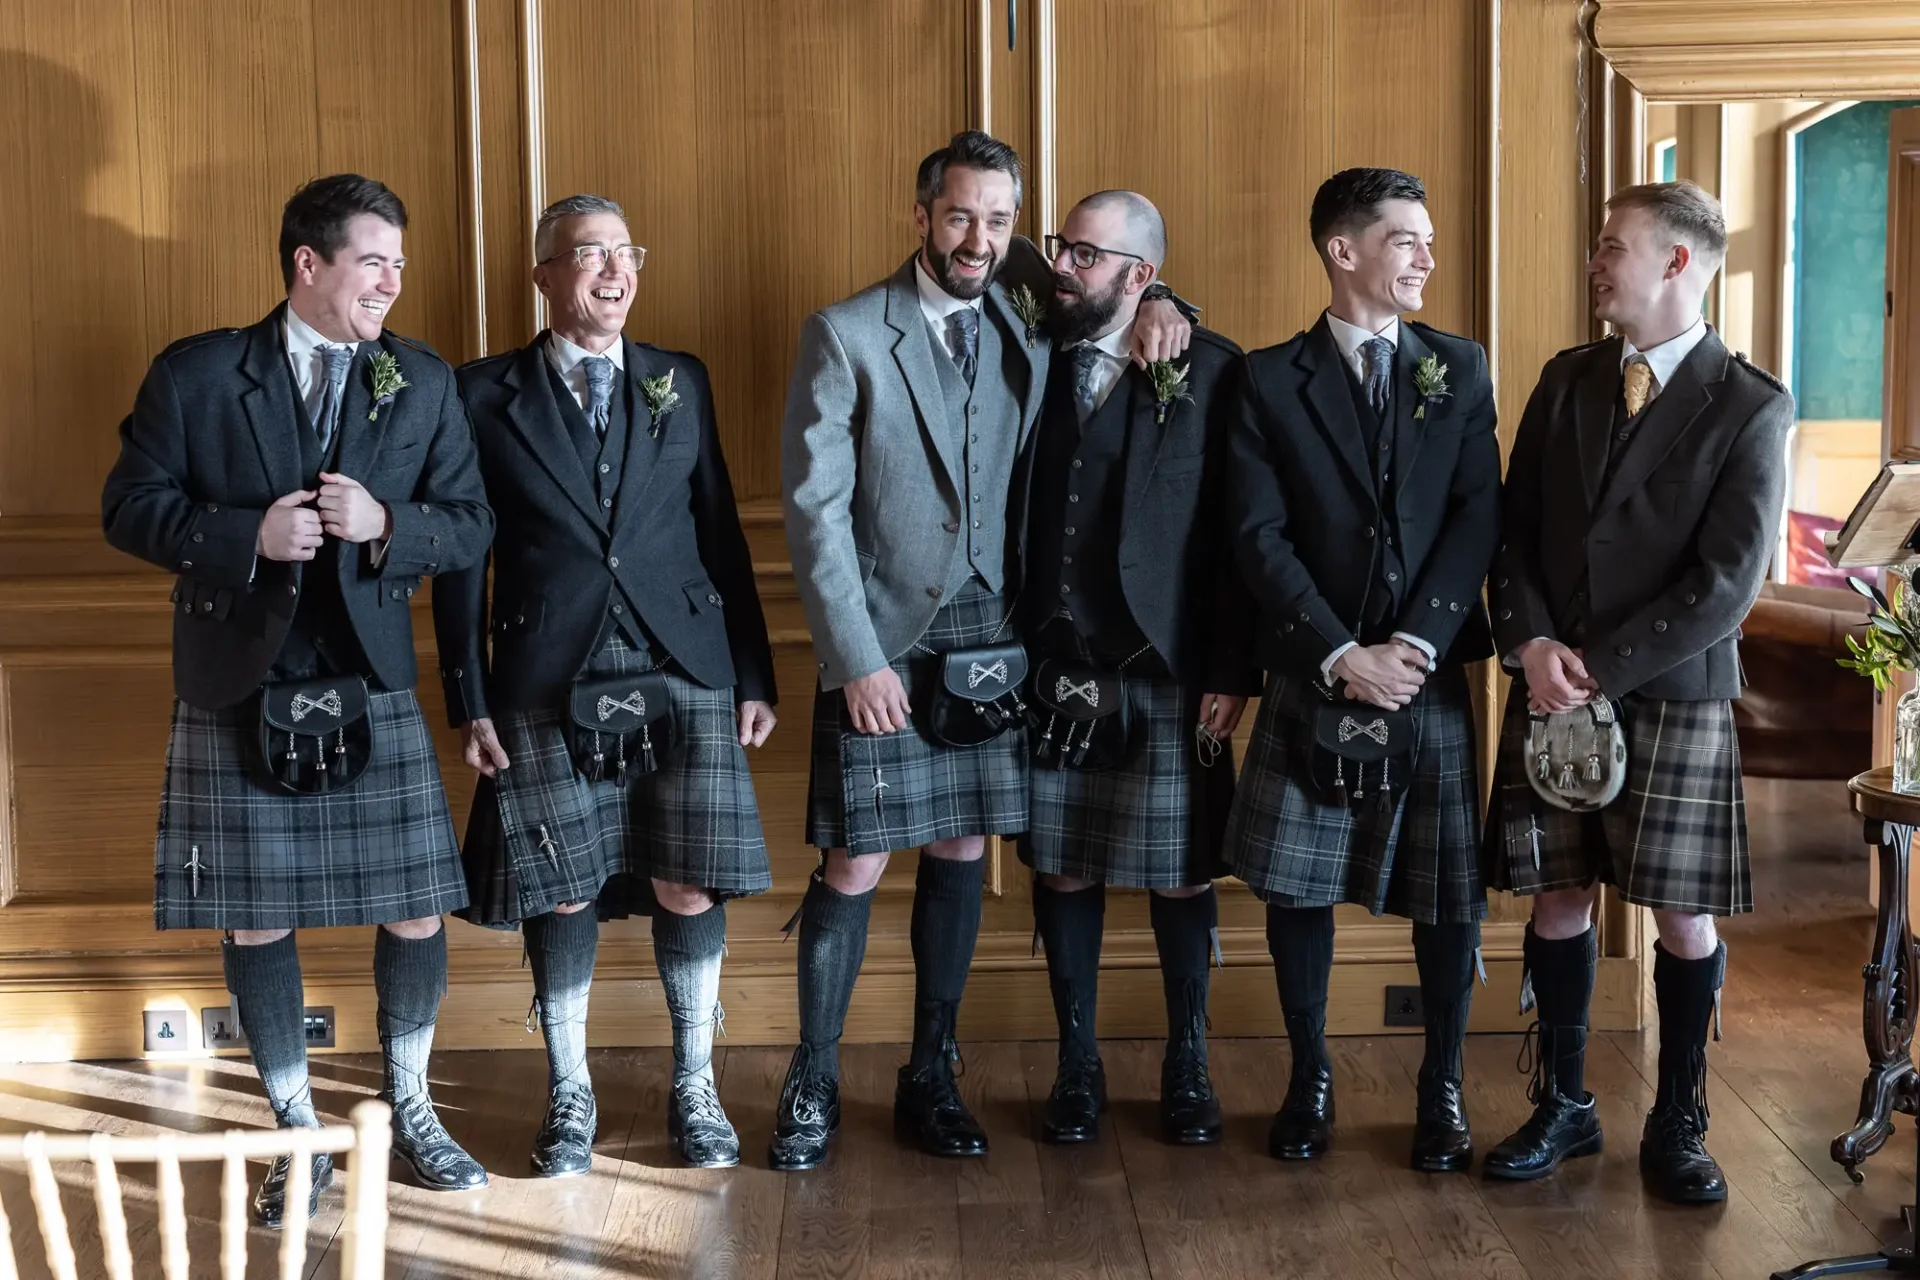 Six men in traditional tartan kilts and jackets, laughing and enjoying a moment together in a wood-paneled room.